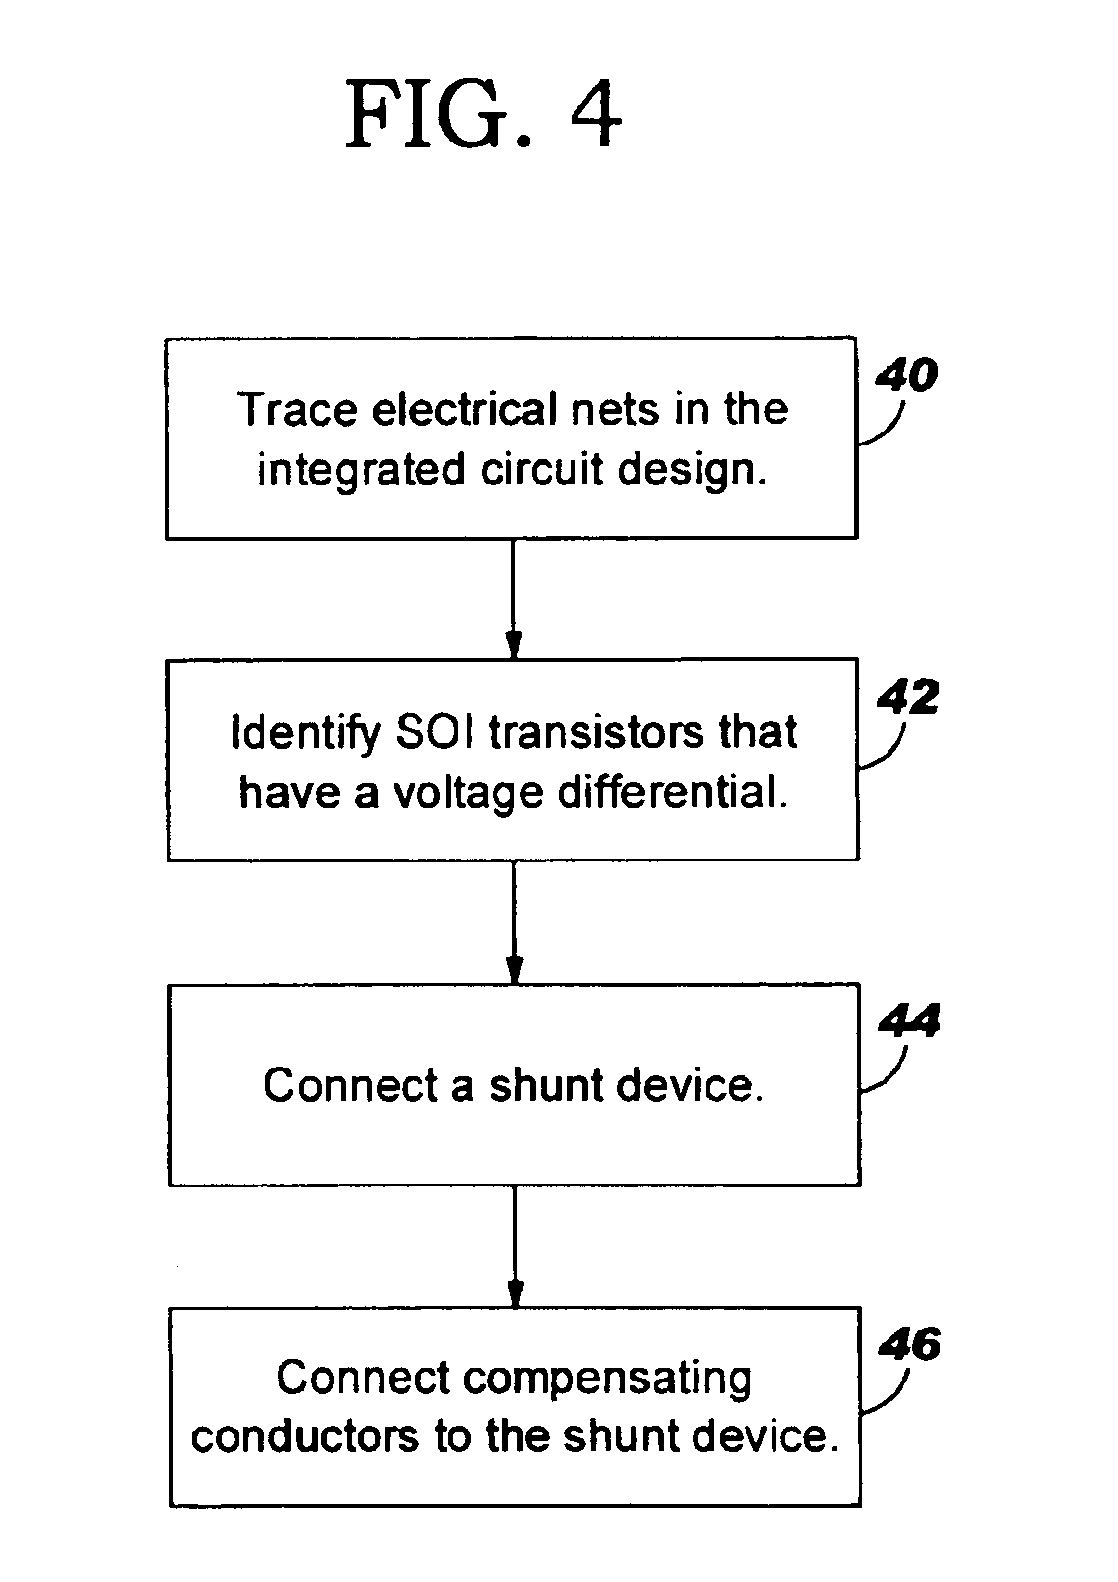 Method of assessing potential for charging damage in SOI designs and structures for eliminating potential for damage